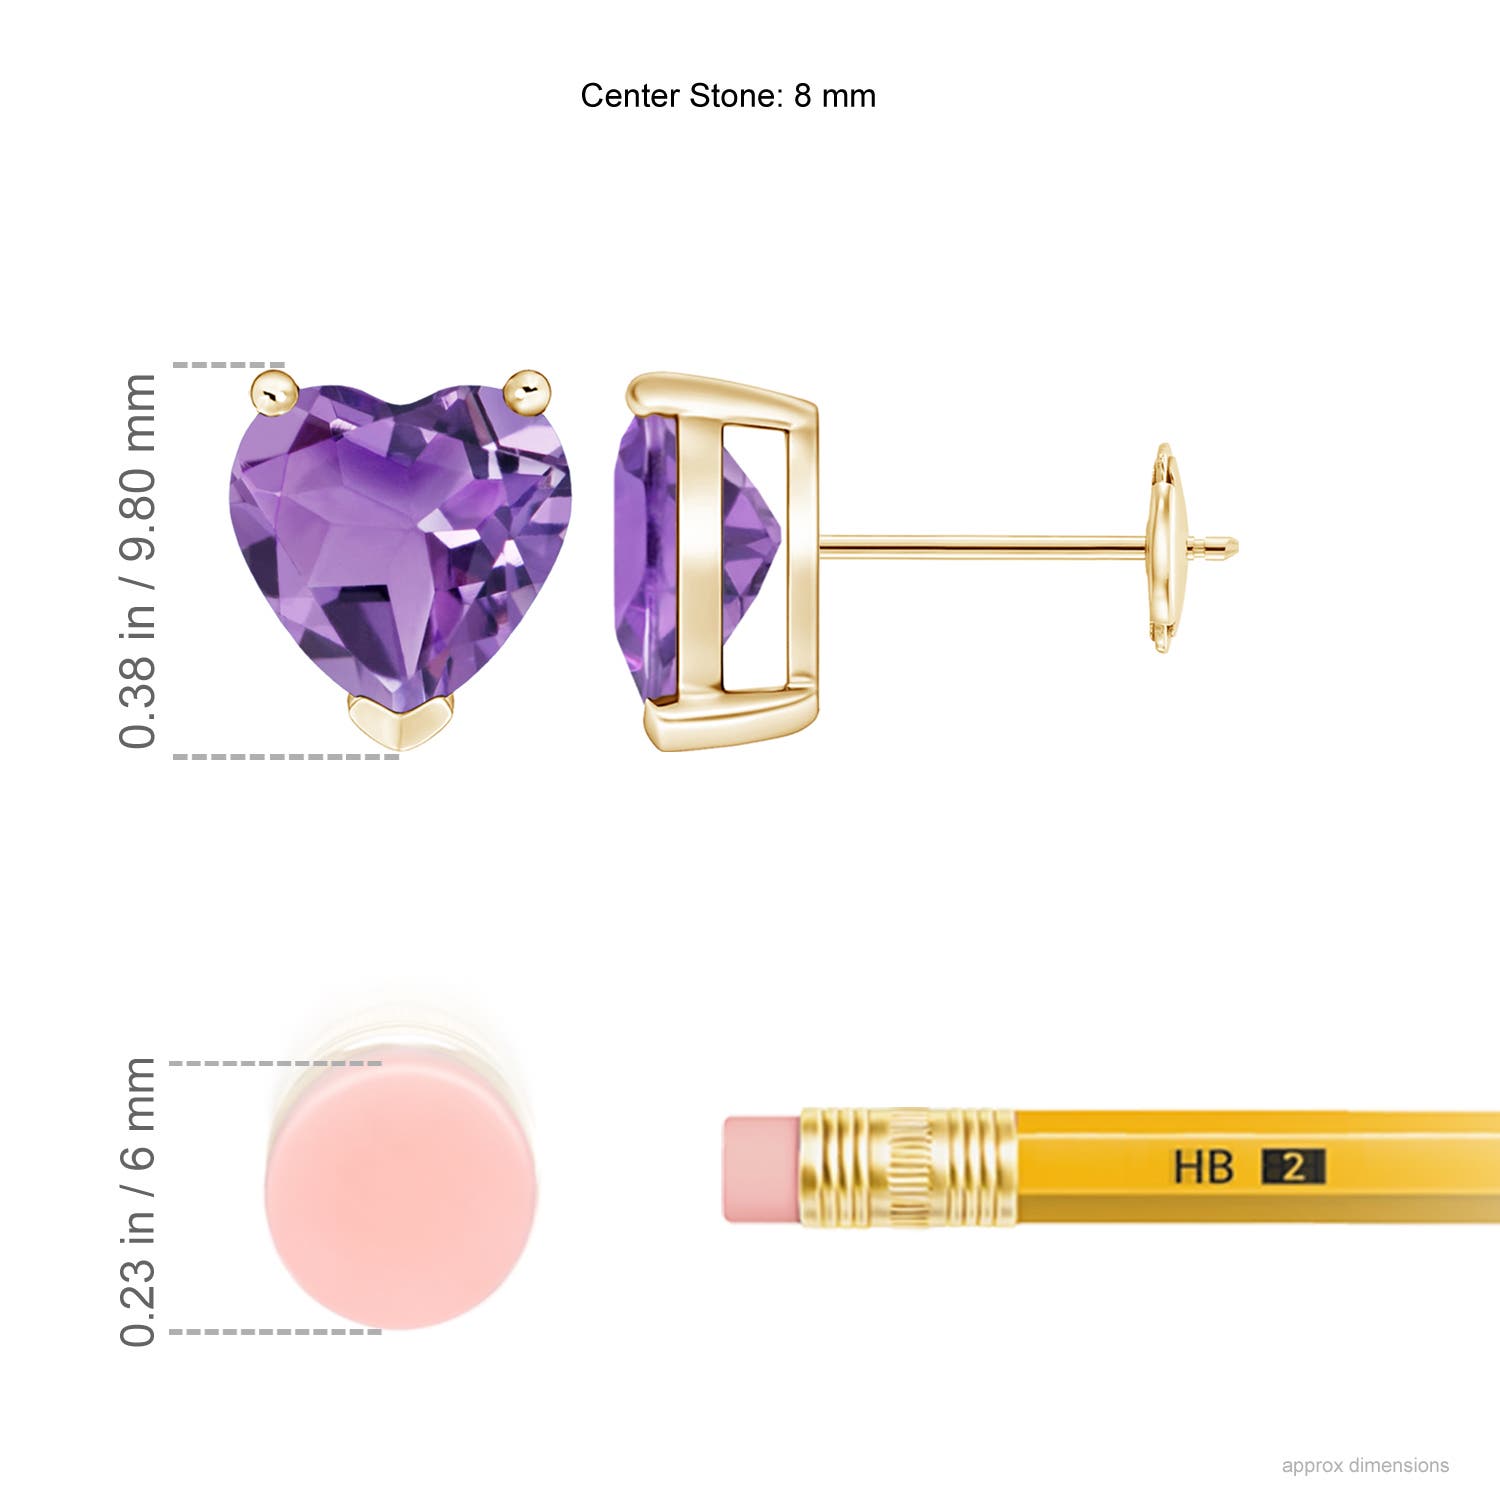 A - Amethyst / 3 CT / 14 KT Yellow Gold